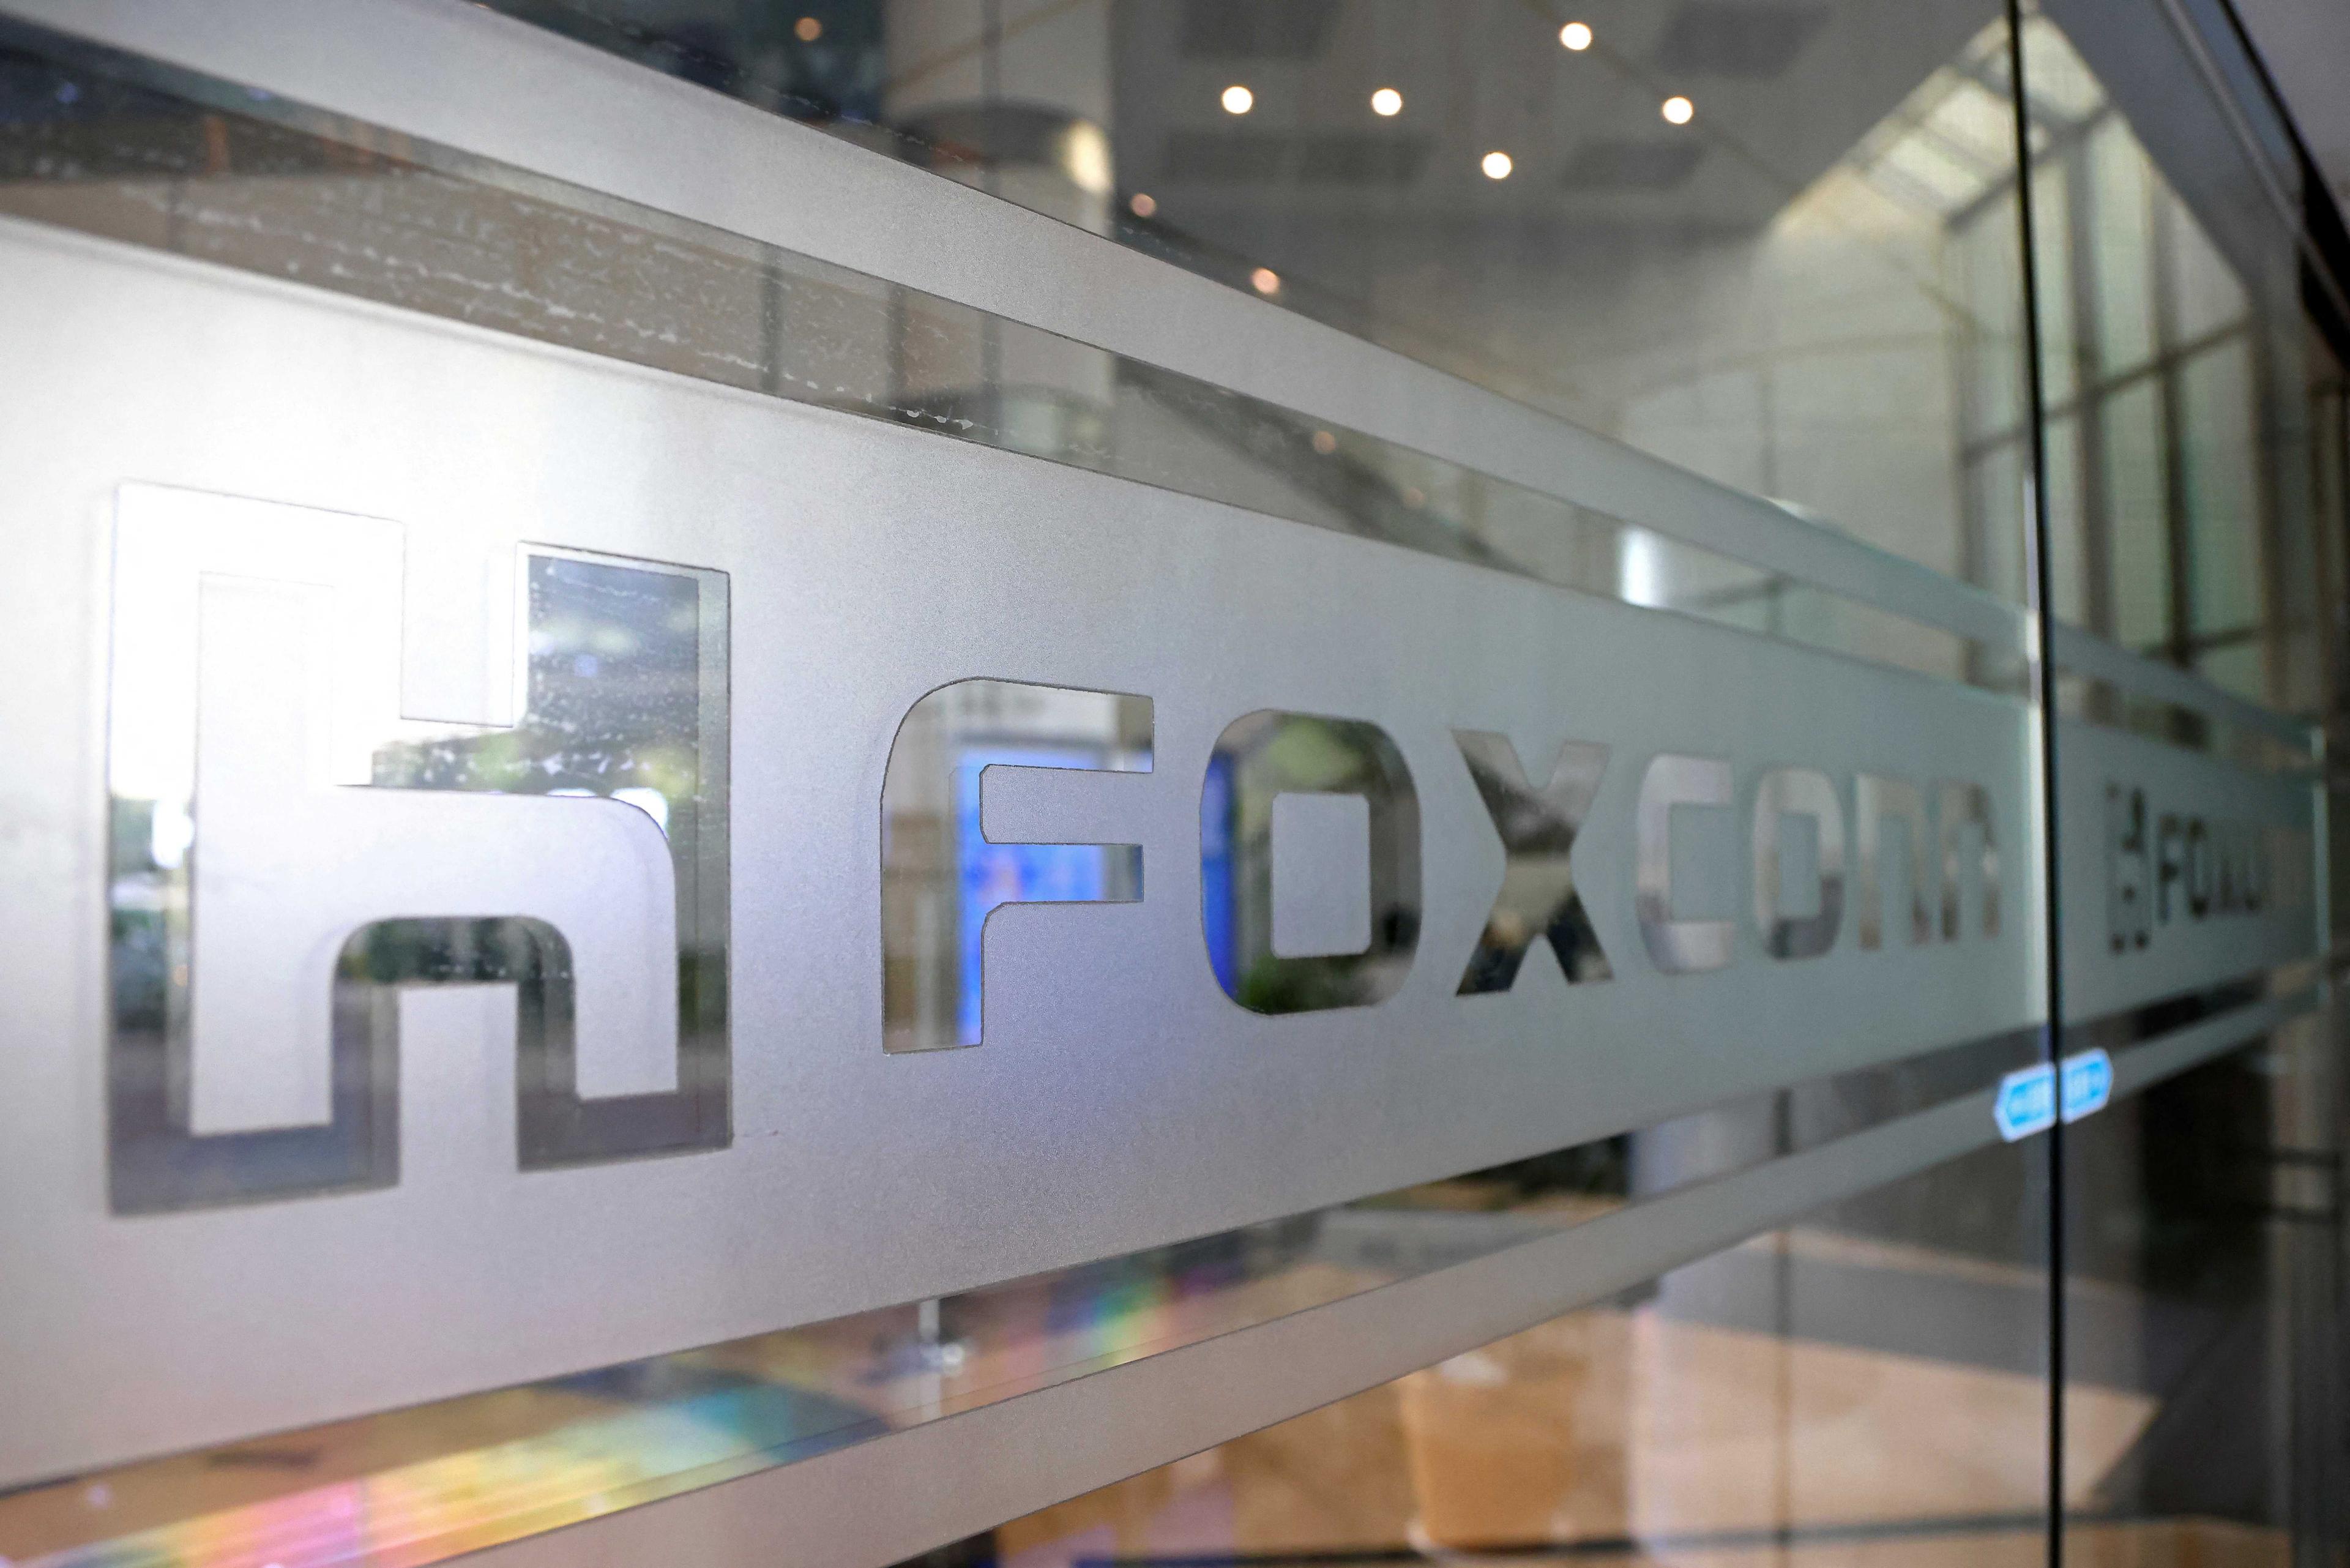 A sign of Foxconn is seen at a glass door inside its office building in Taipei, Taiwan Nov 12, 2020. Photo: Reuters